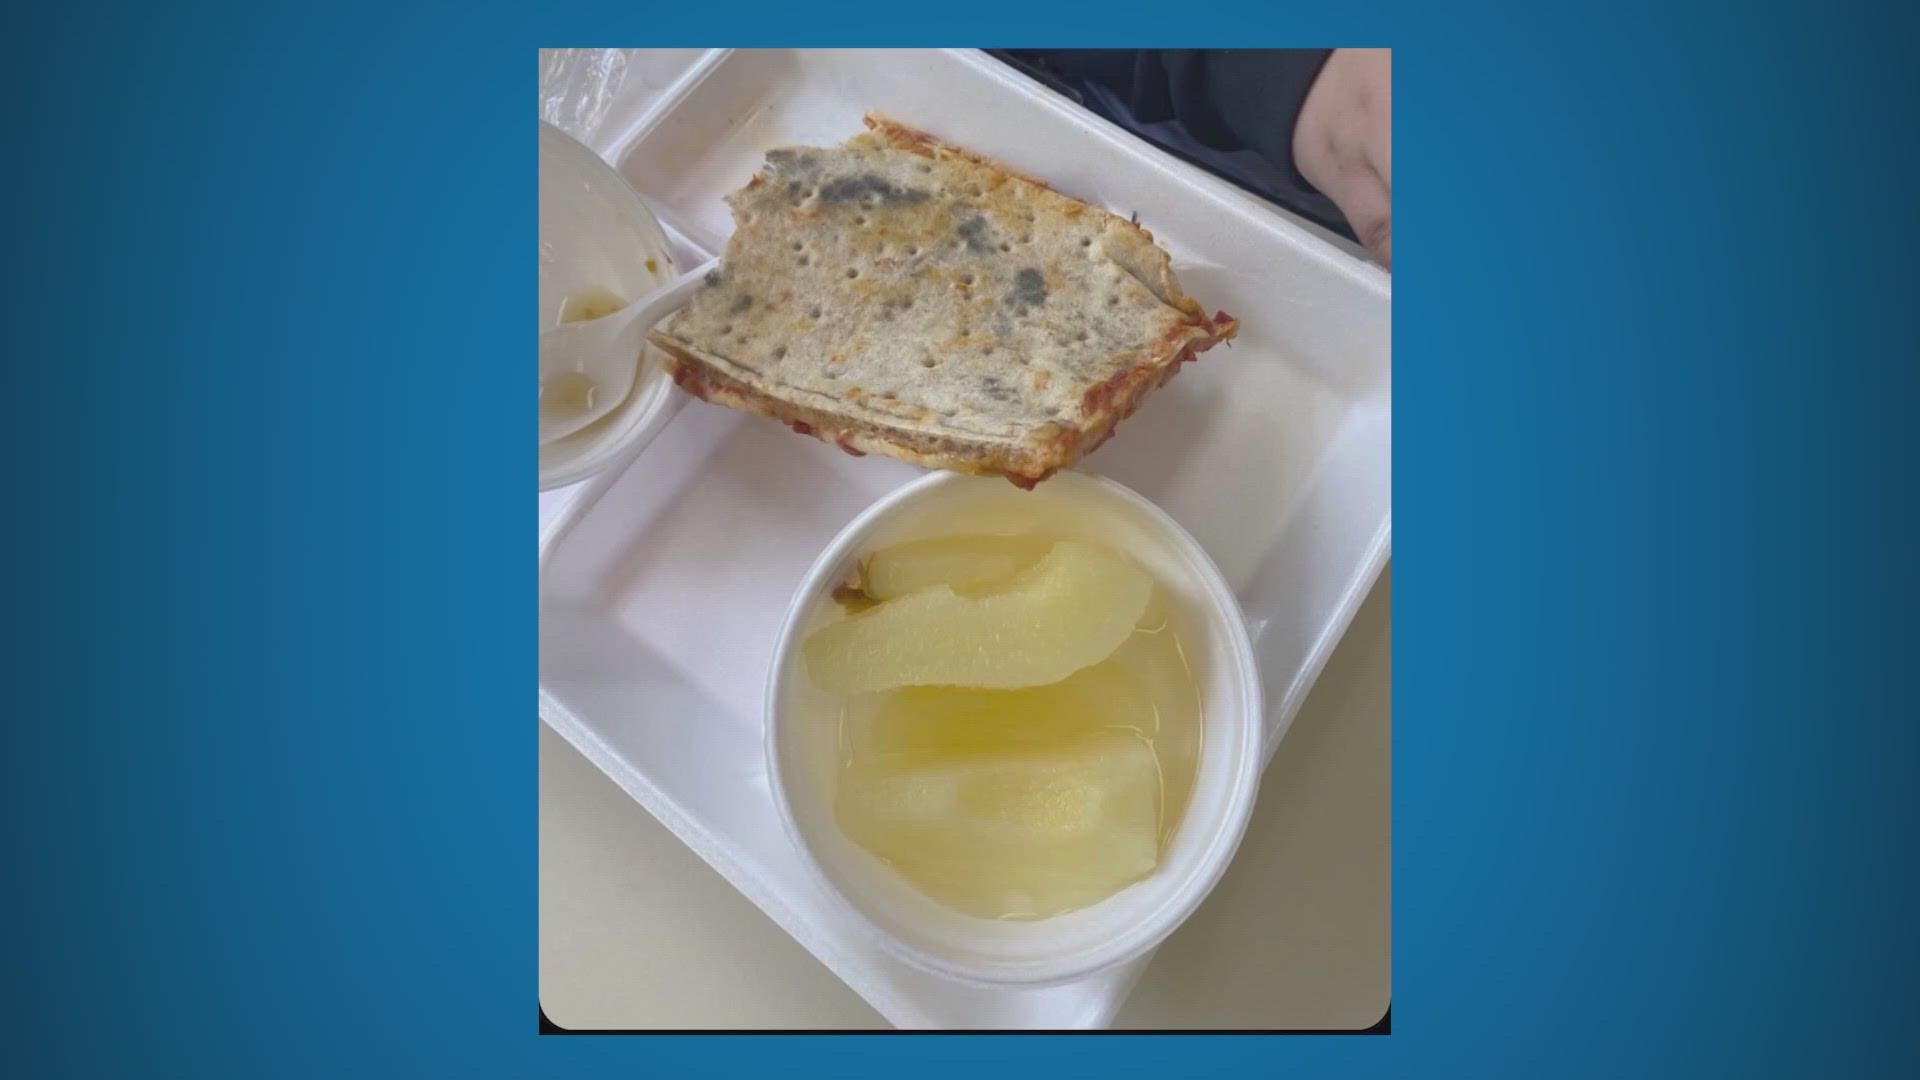 A family says several students at Byrd middle school were served a pizza with mold on it.